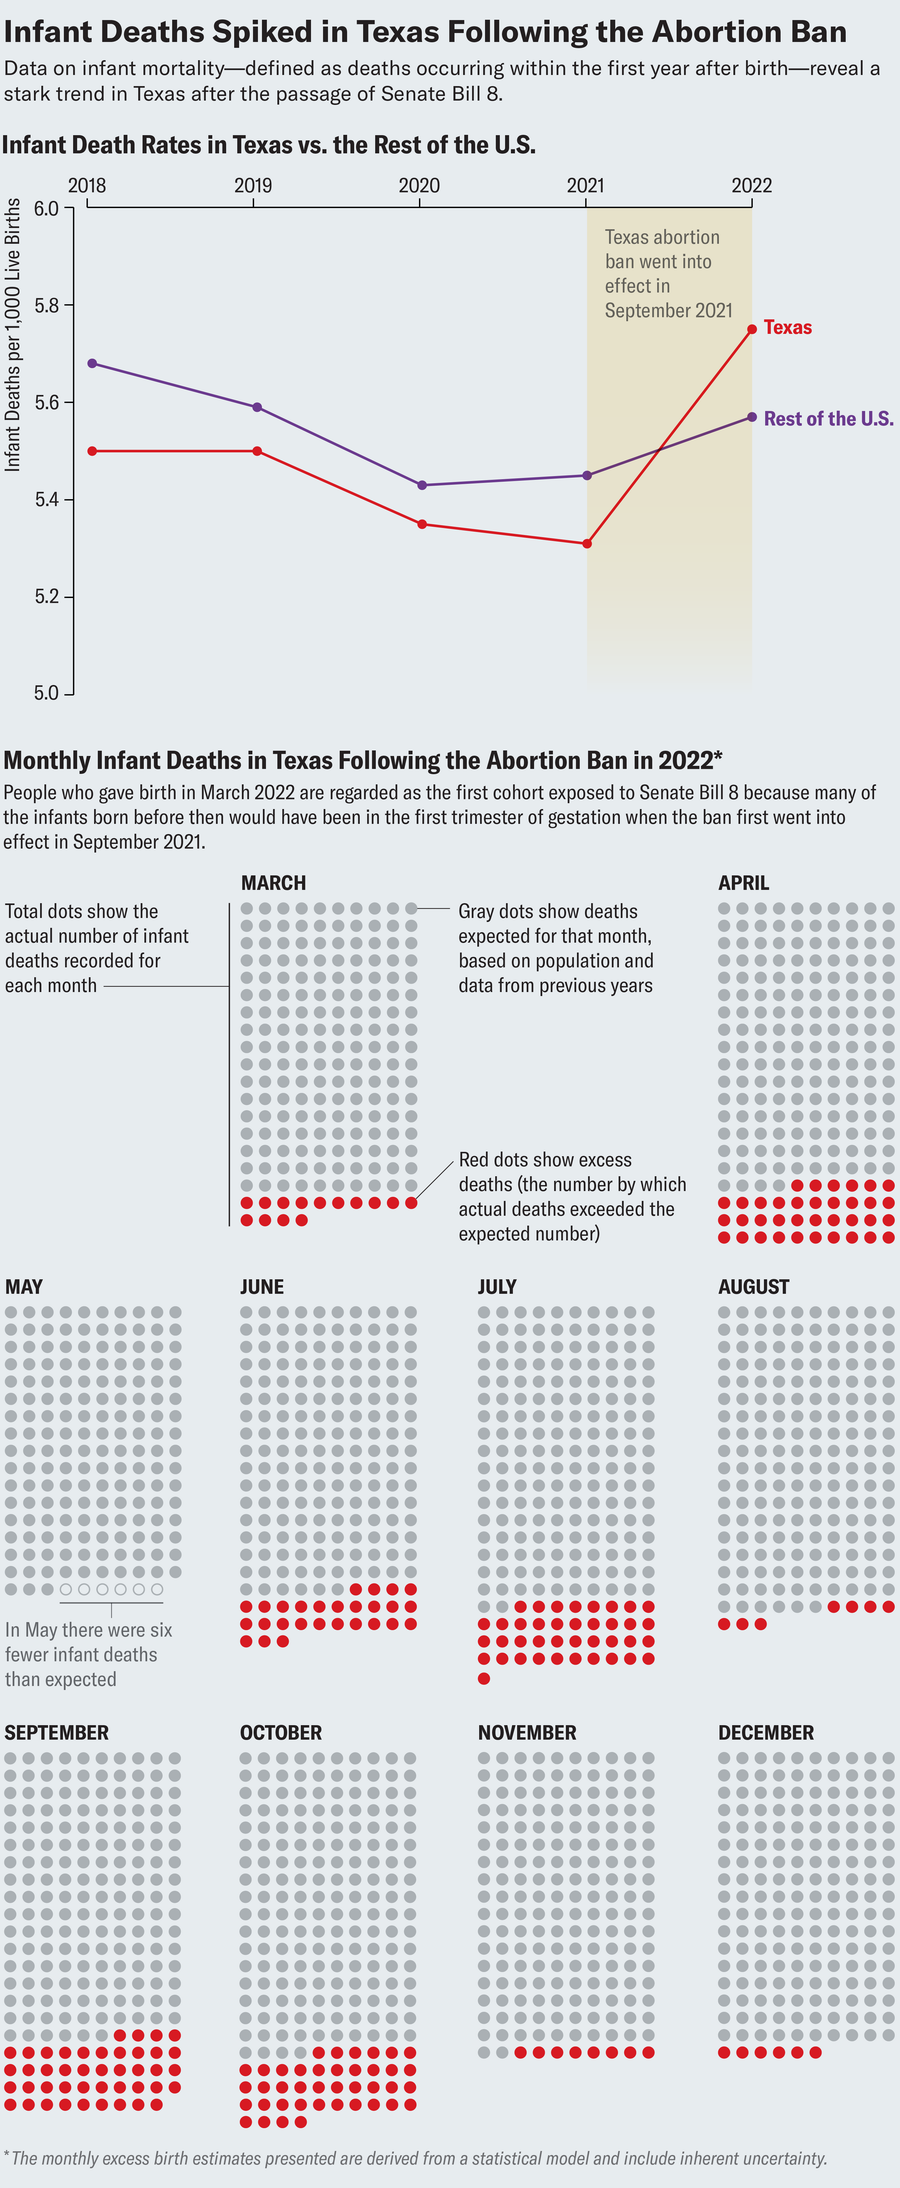 Line chart shows annual rate of infant deaths from 2018 to 2022 in Texas and the rest of the U.S. Arrays of dots show actual and expected monthly infant deaths in Texas from March to December 2022.